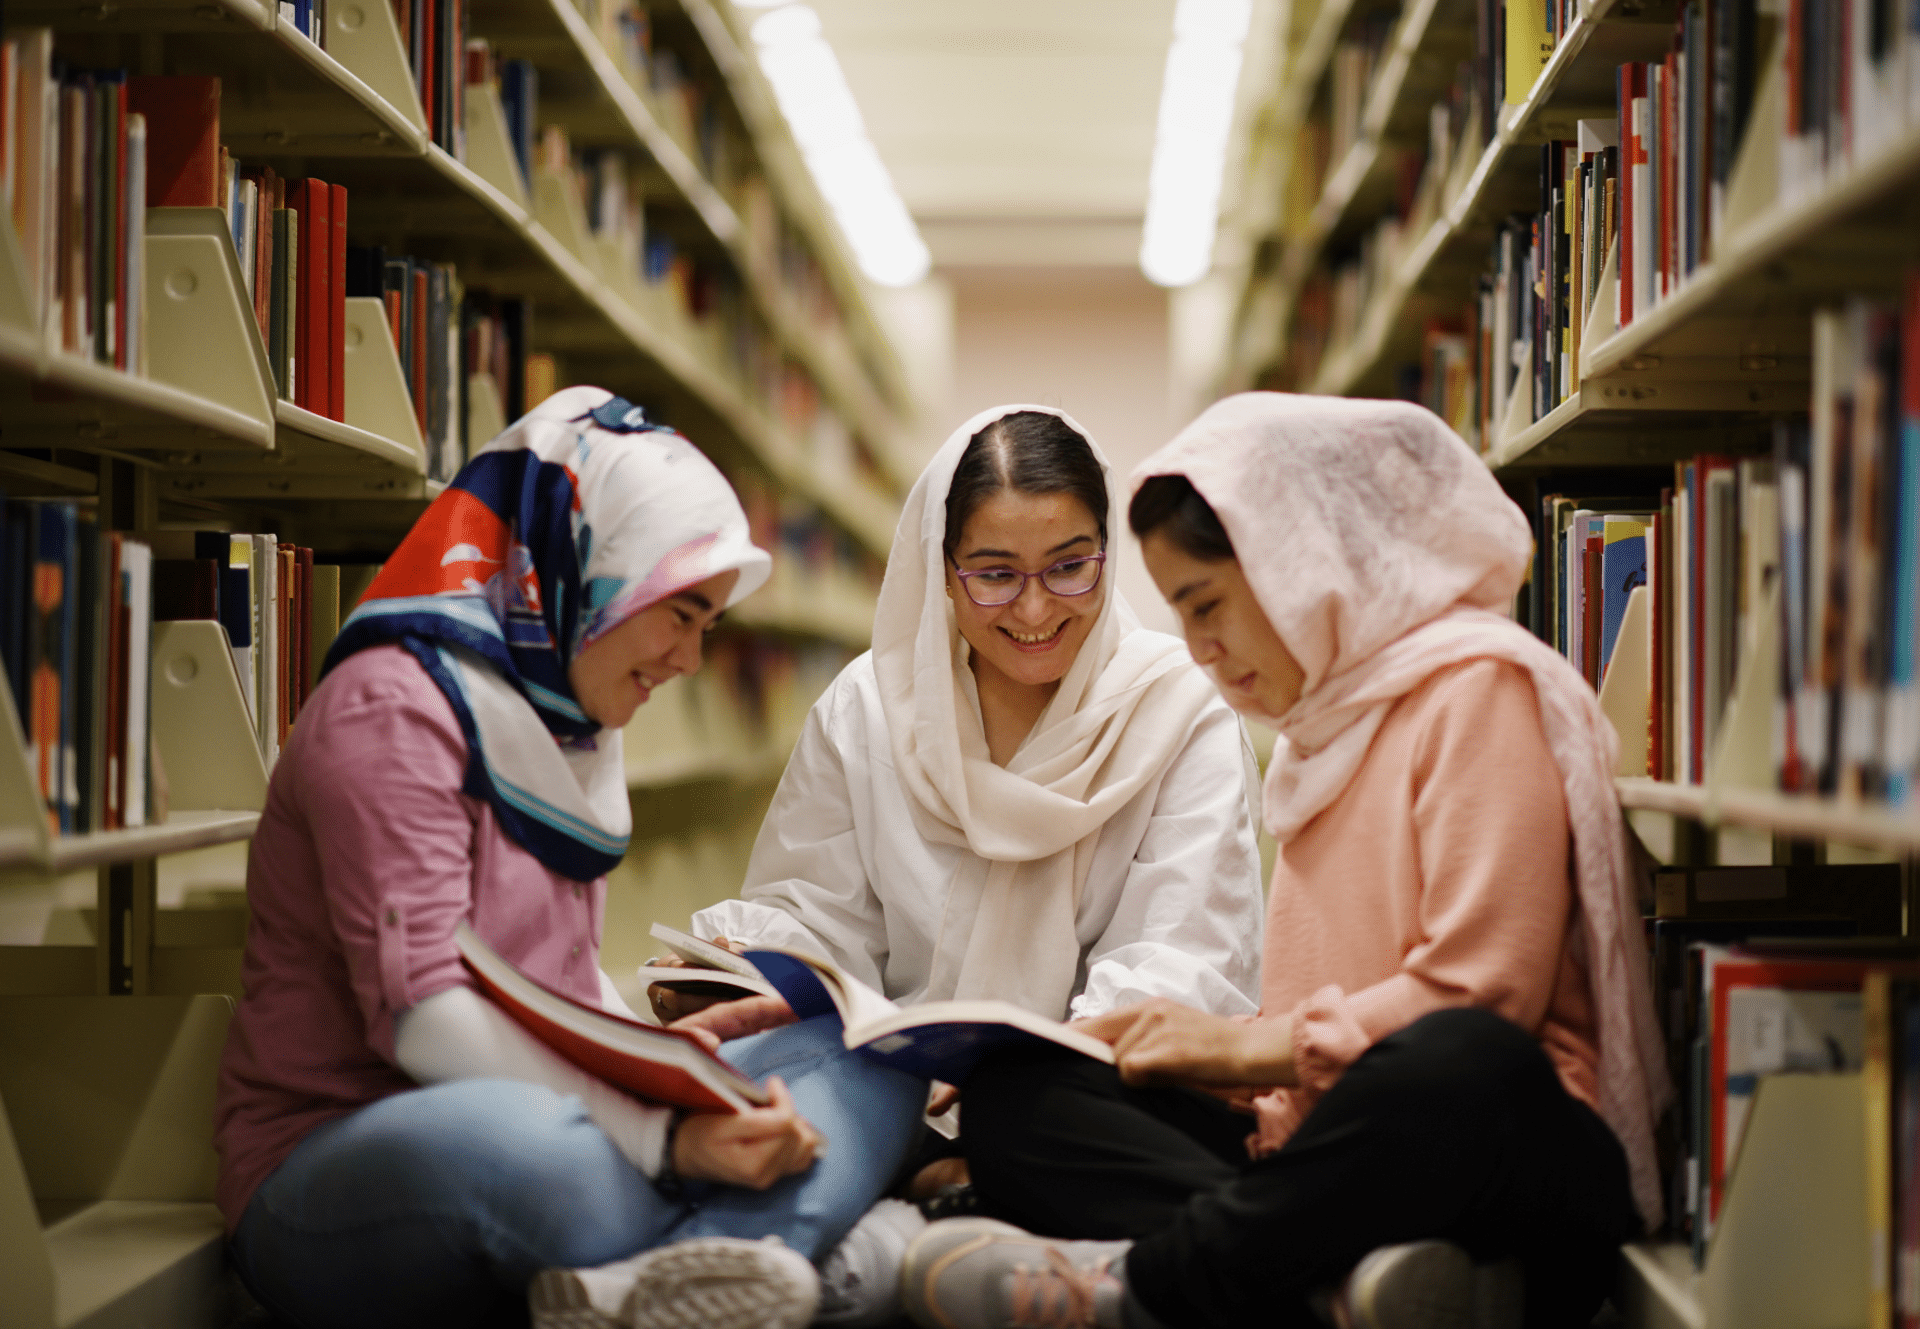 Three girls sitting together in a library.